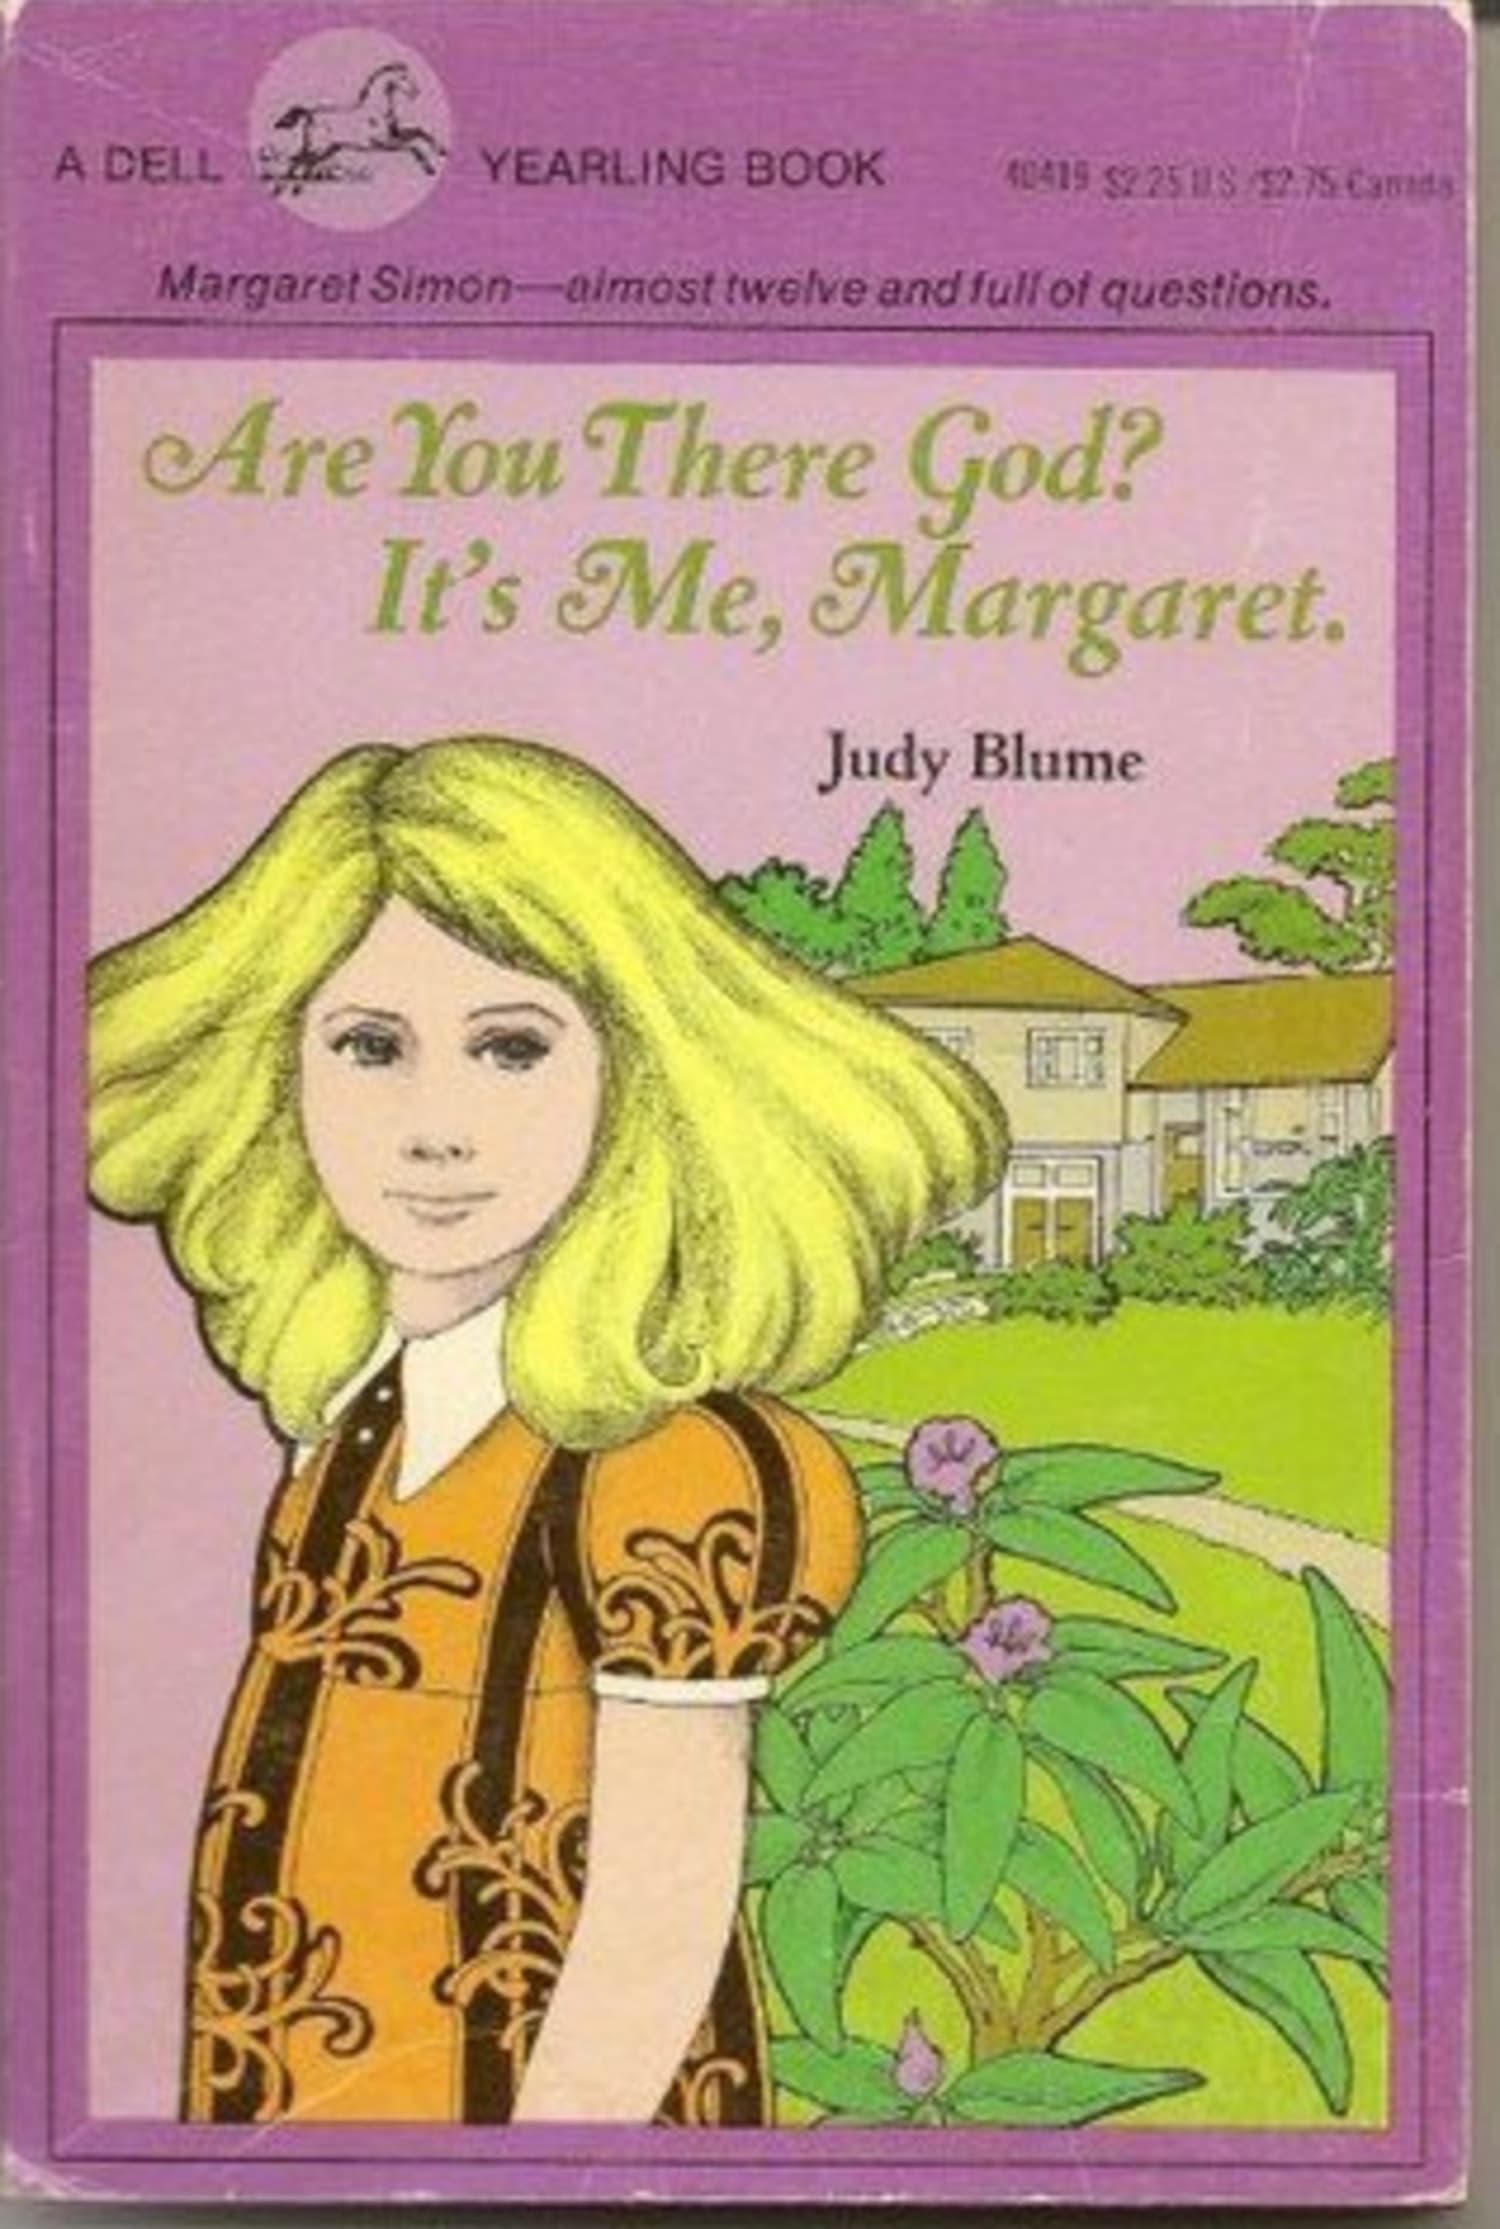 Are You There God? It's Me, Margaret Movie First Look: Photos